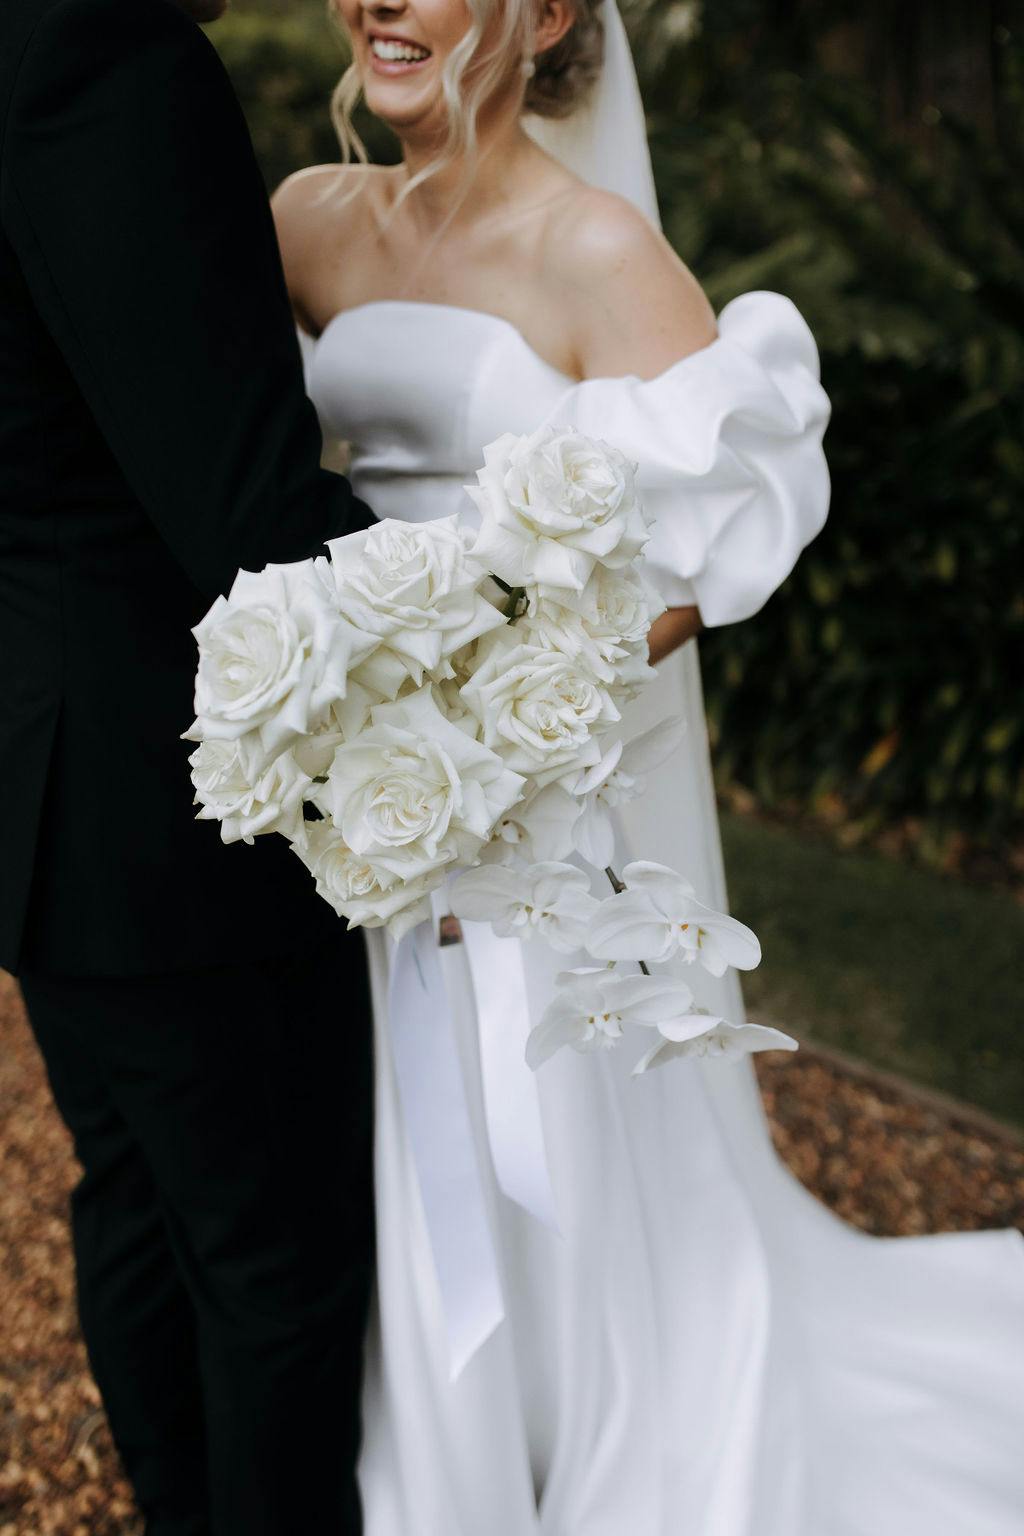 A bride in a white dress holds a bouquet of white roses and flowers while standing next to a groom dressed in black. The background features greenery and a natural setting.